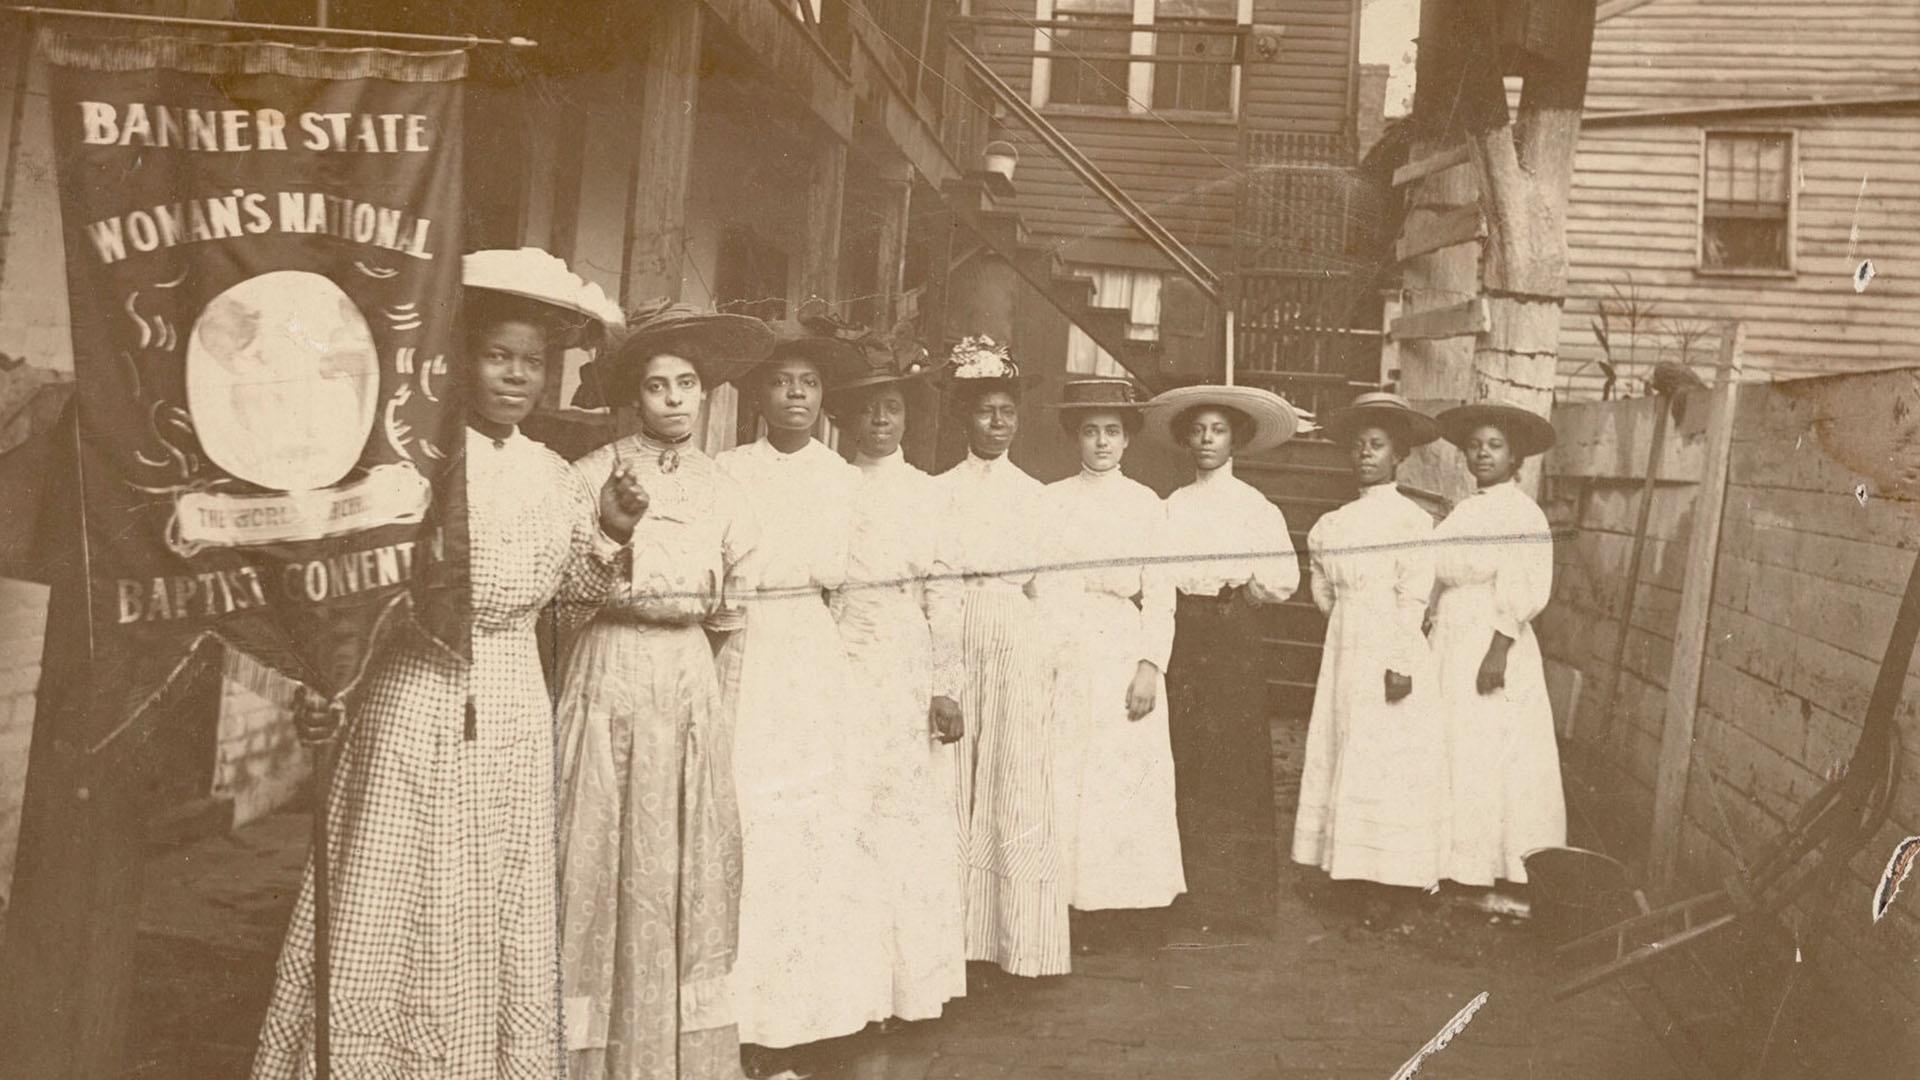 Advocate for women’s suffrage Nannie Helen Burroughs pictured with other women.